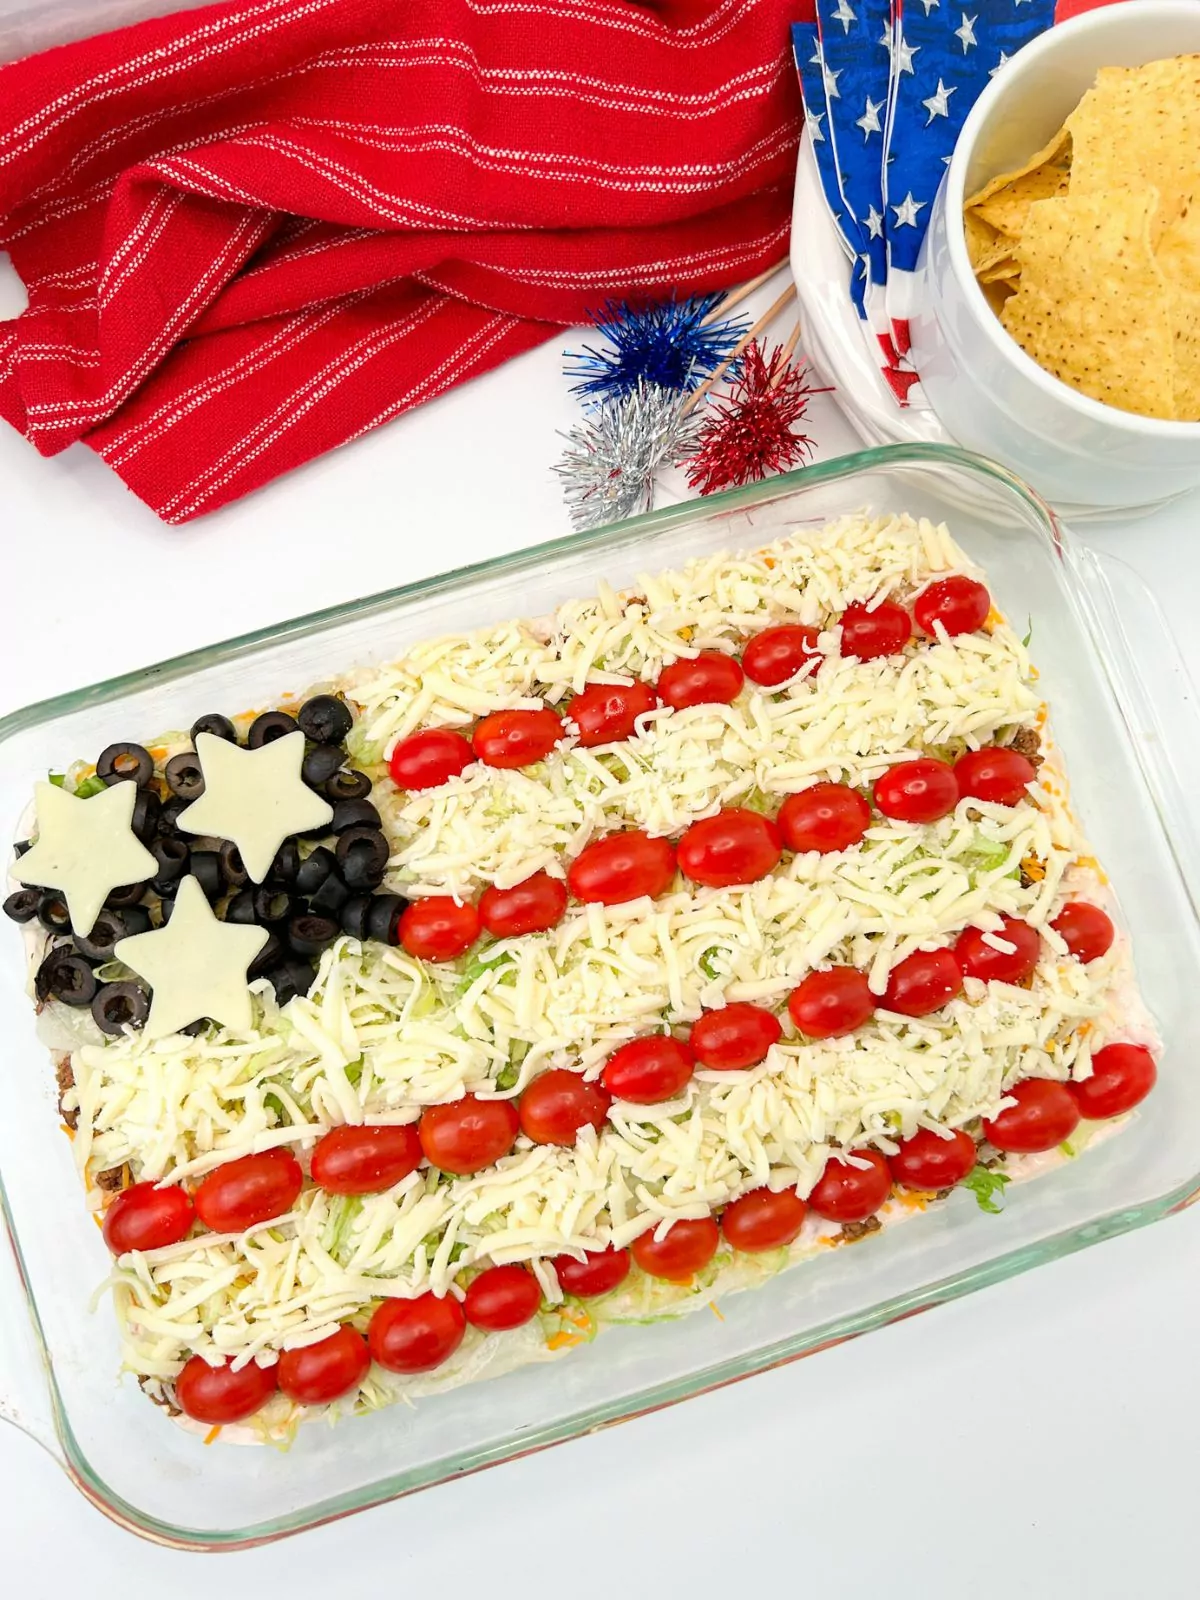 completed taco salad dip in casserole dish decorated like the American flag.